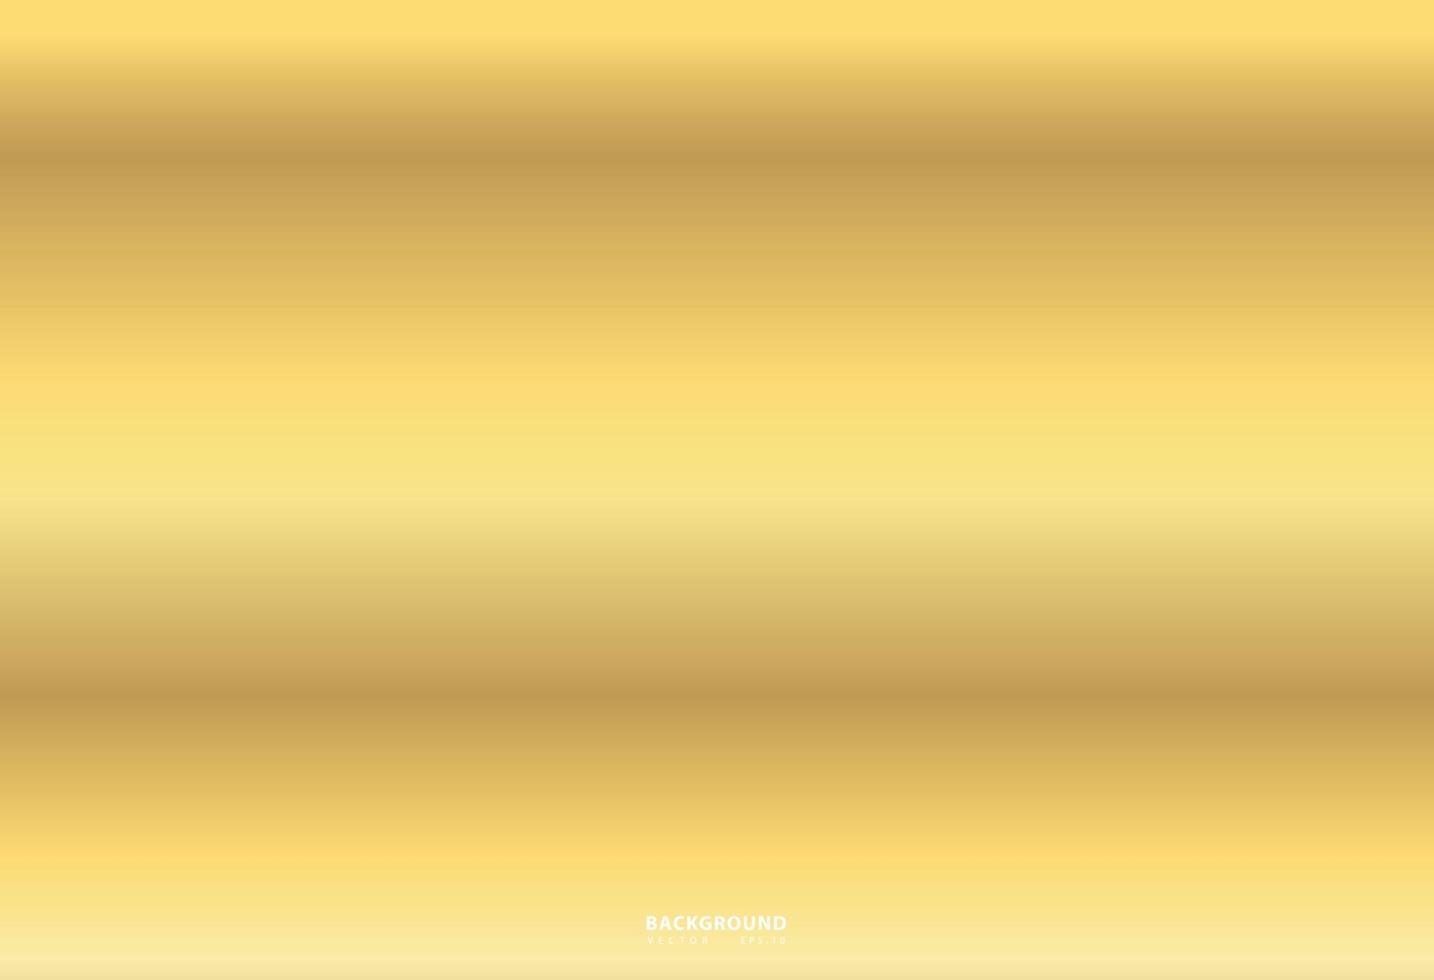 Realistic golden vector elegant. Gold foil texture background, shiny and metal gradient template for gold, frame ribbon, Abstract luxury smooth illustration wallpaper